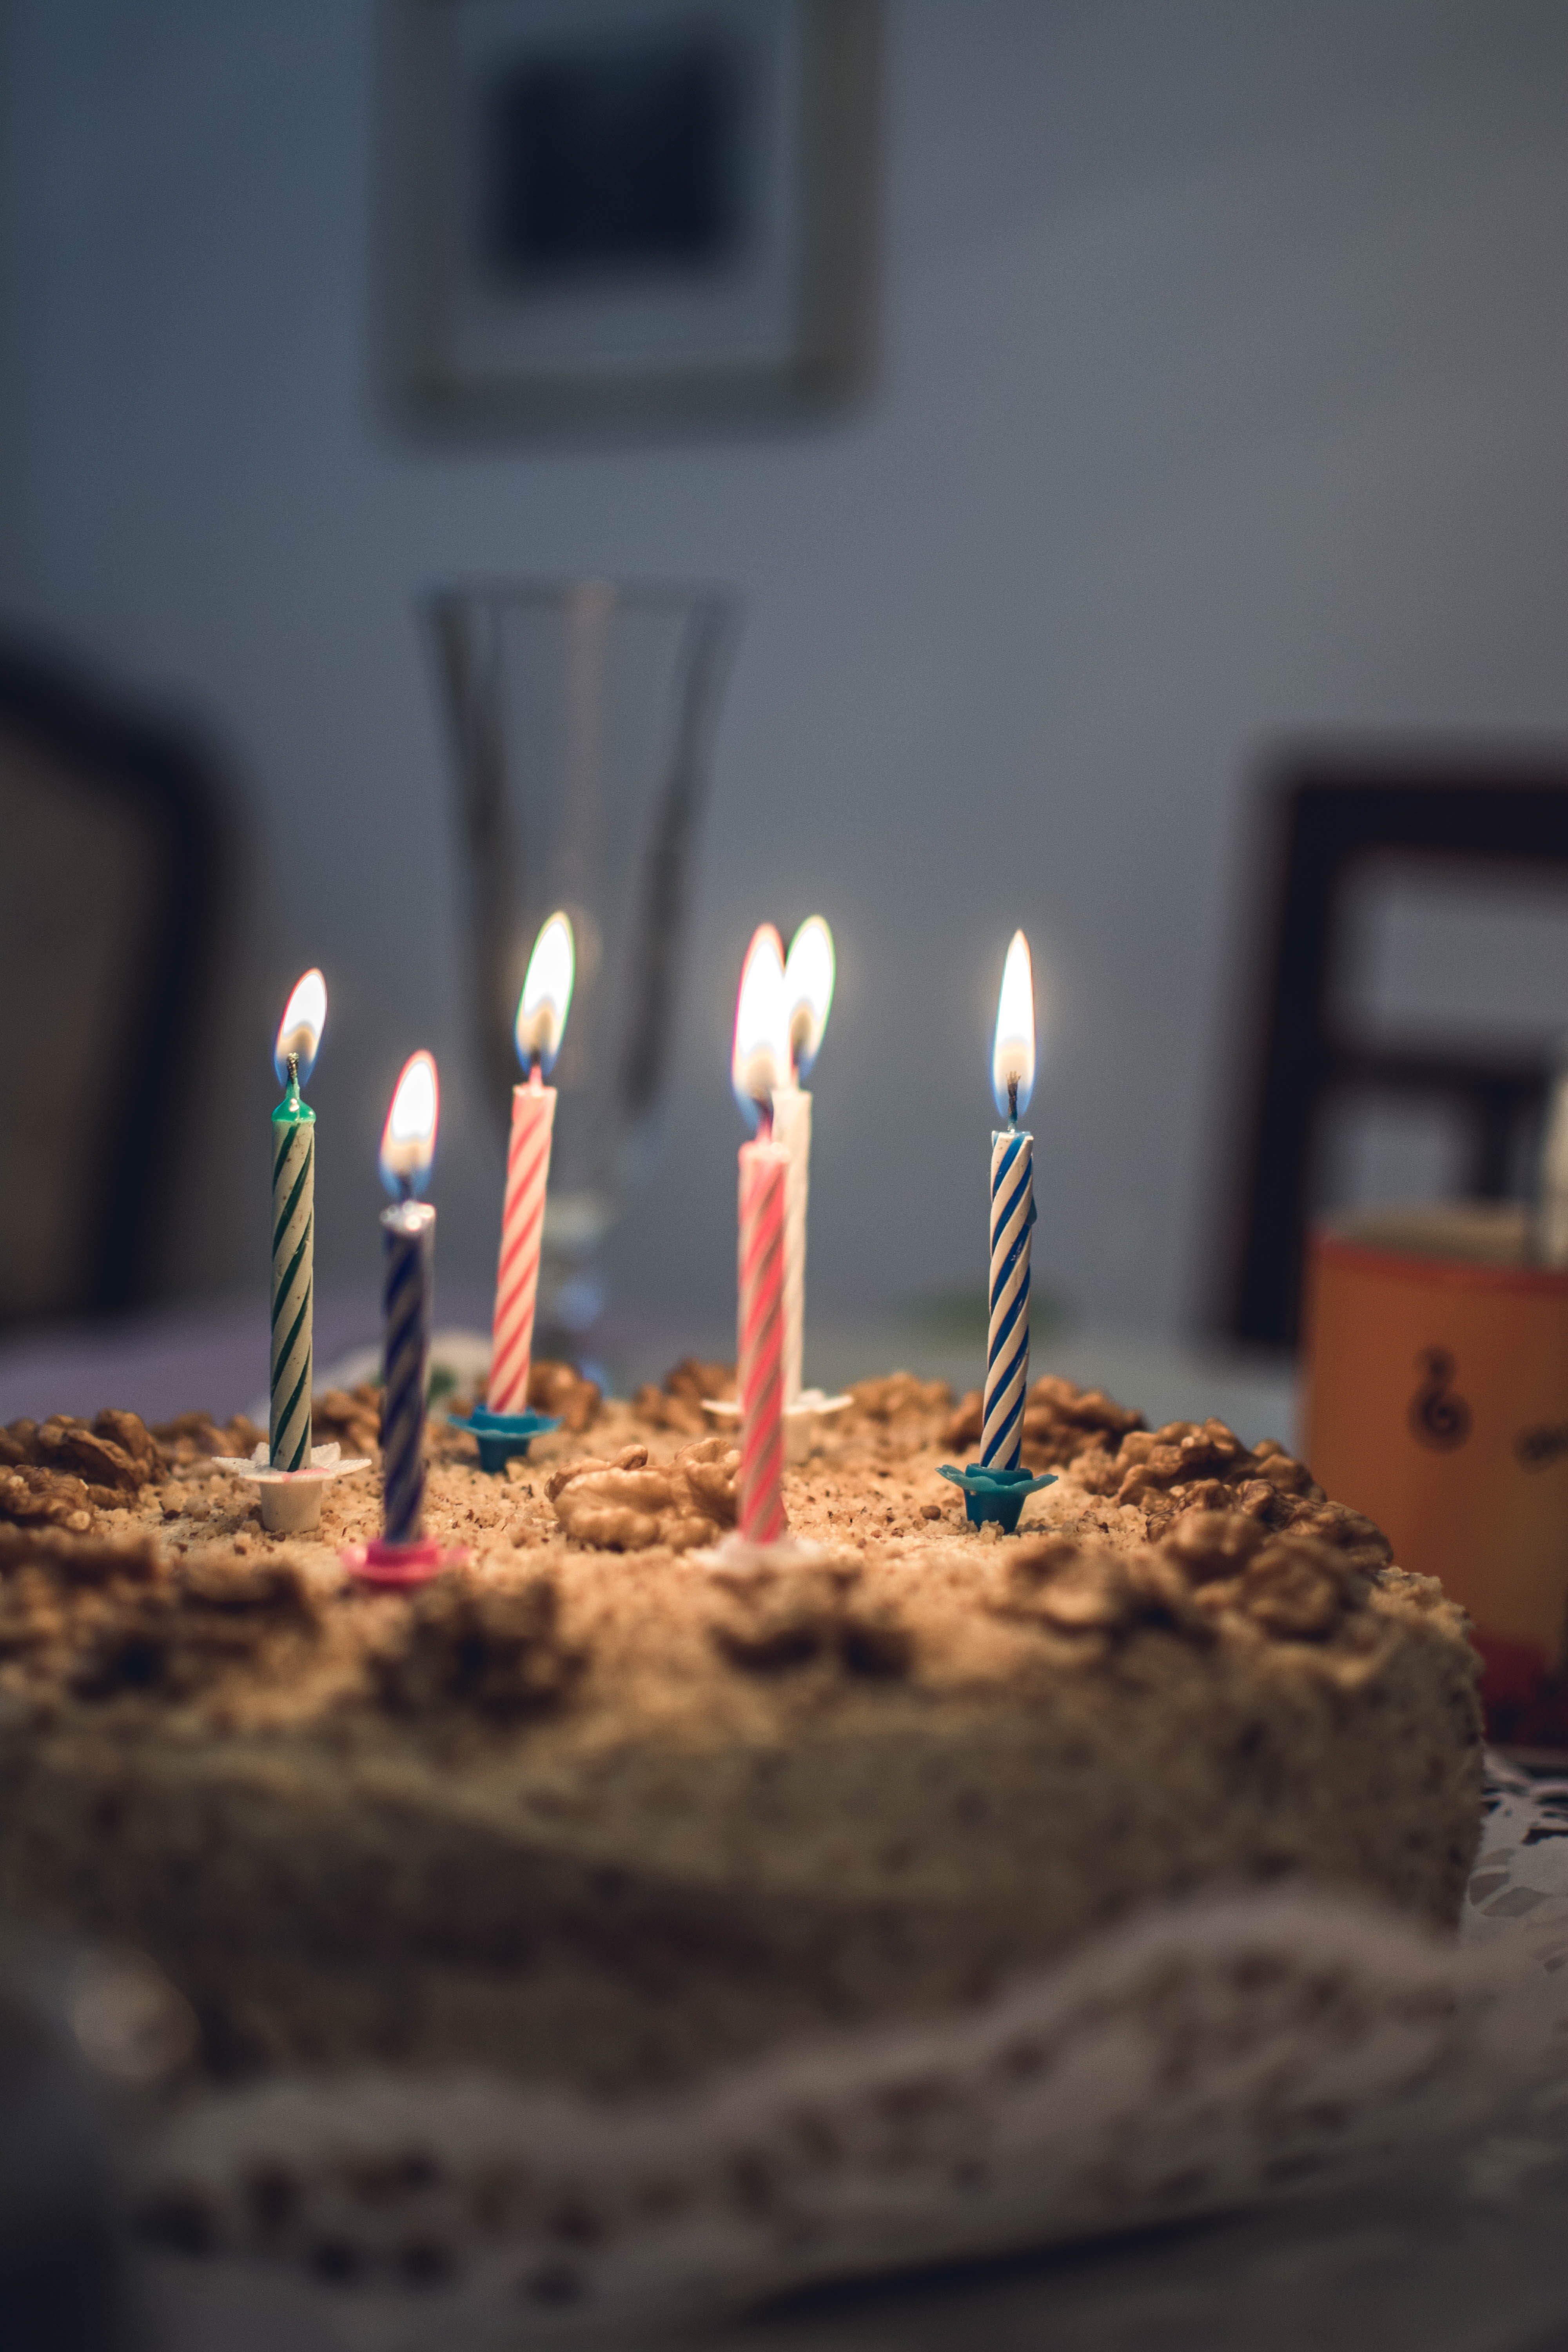 Elsa's old neighbors  brought her a birthday cake | Photo: Pexels